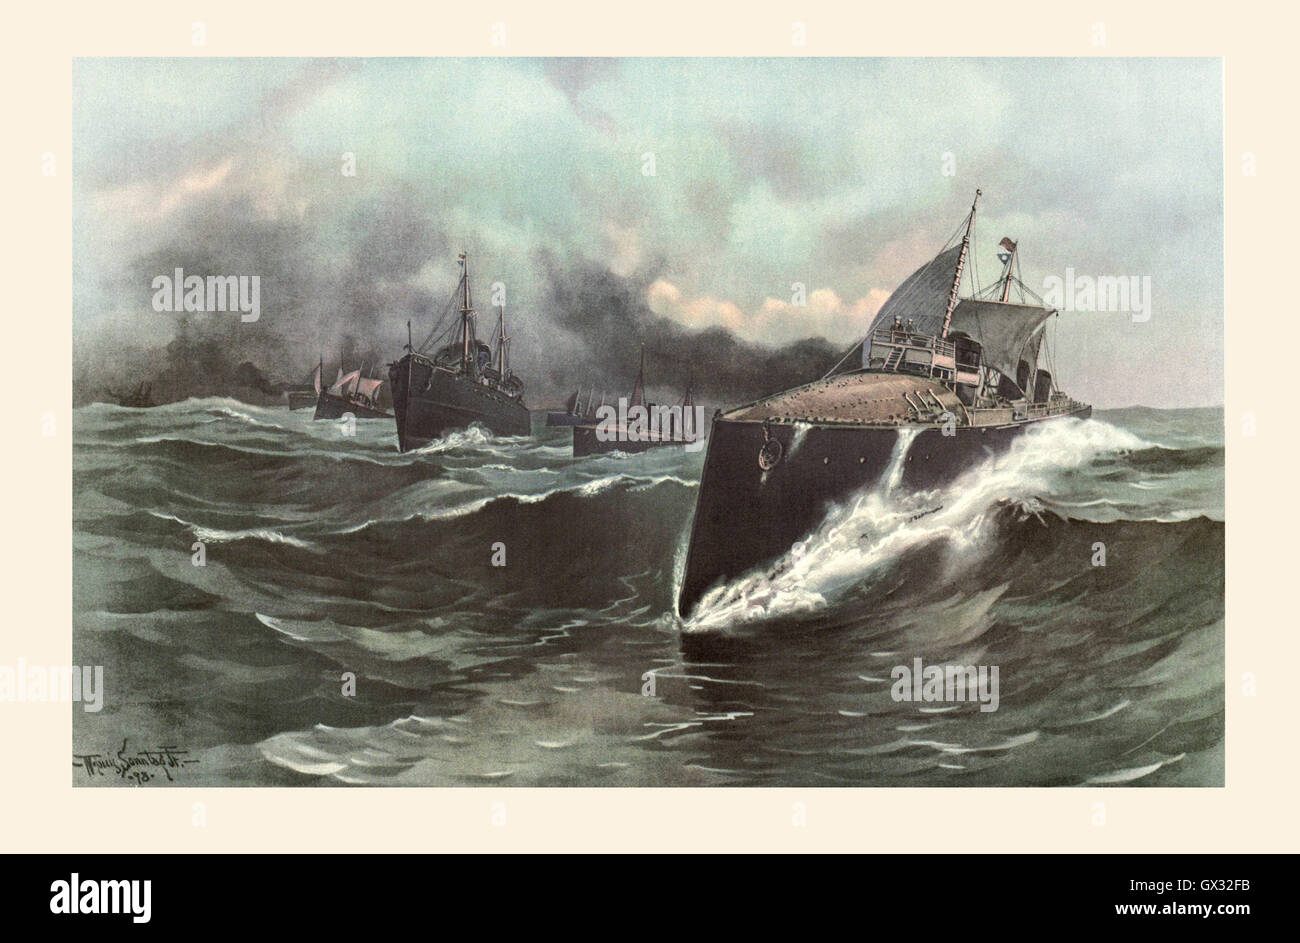 Spain's torpedo boat flotilla en route from The Canaries to Puerto Rico during the Spanish-American War. From left,  torpedo boat Ariete, torpedo gunboat Pluton, torpedo gunboat Terror, converted merchantman Ciudad de Cadiz, as convoy, torpedo boat Rayo, torpedo boat Azor and torpedo gunboat Furor.  After the drawing by W. Louis Sonntag Jr. Stock Photo